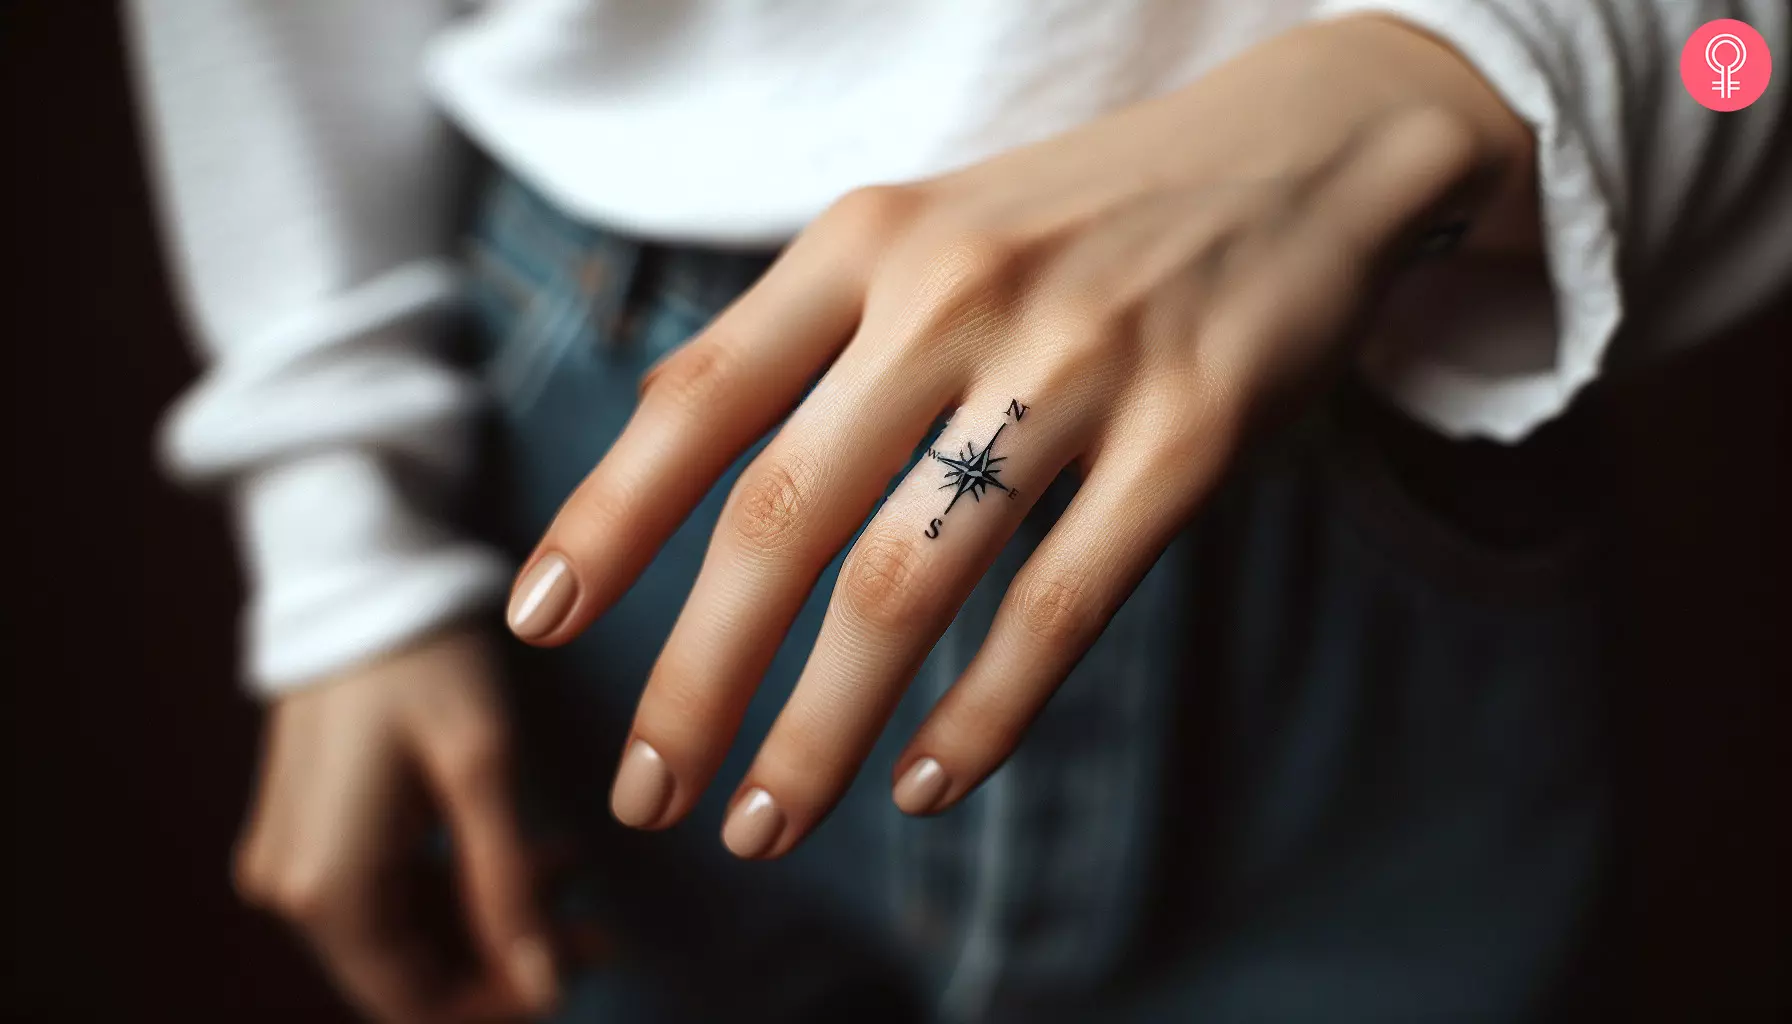 A woman with a compass finger tattoo